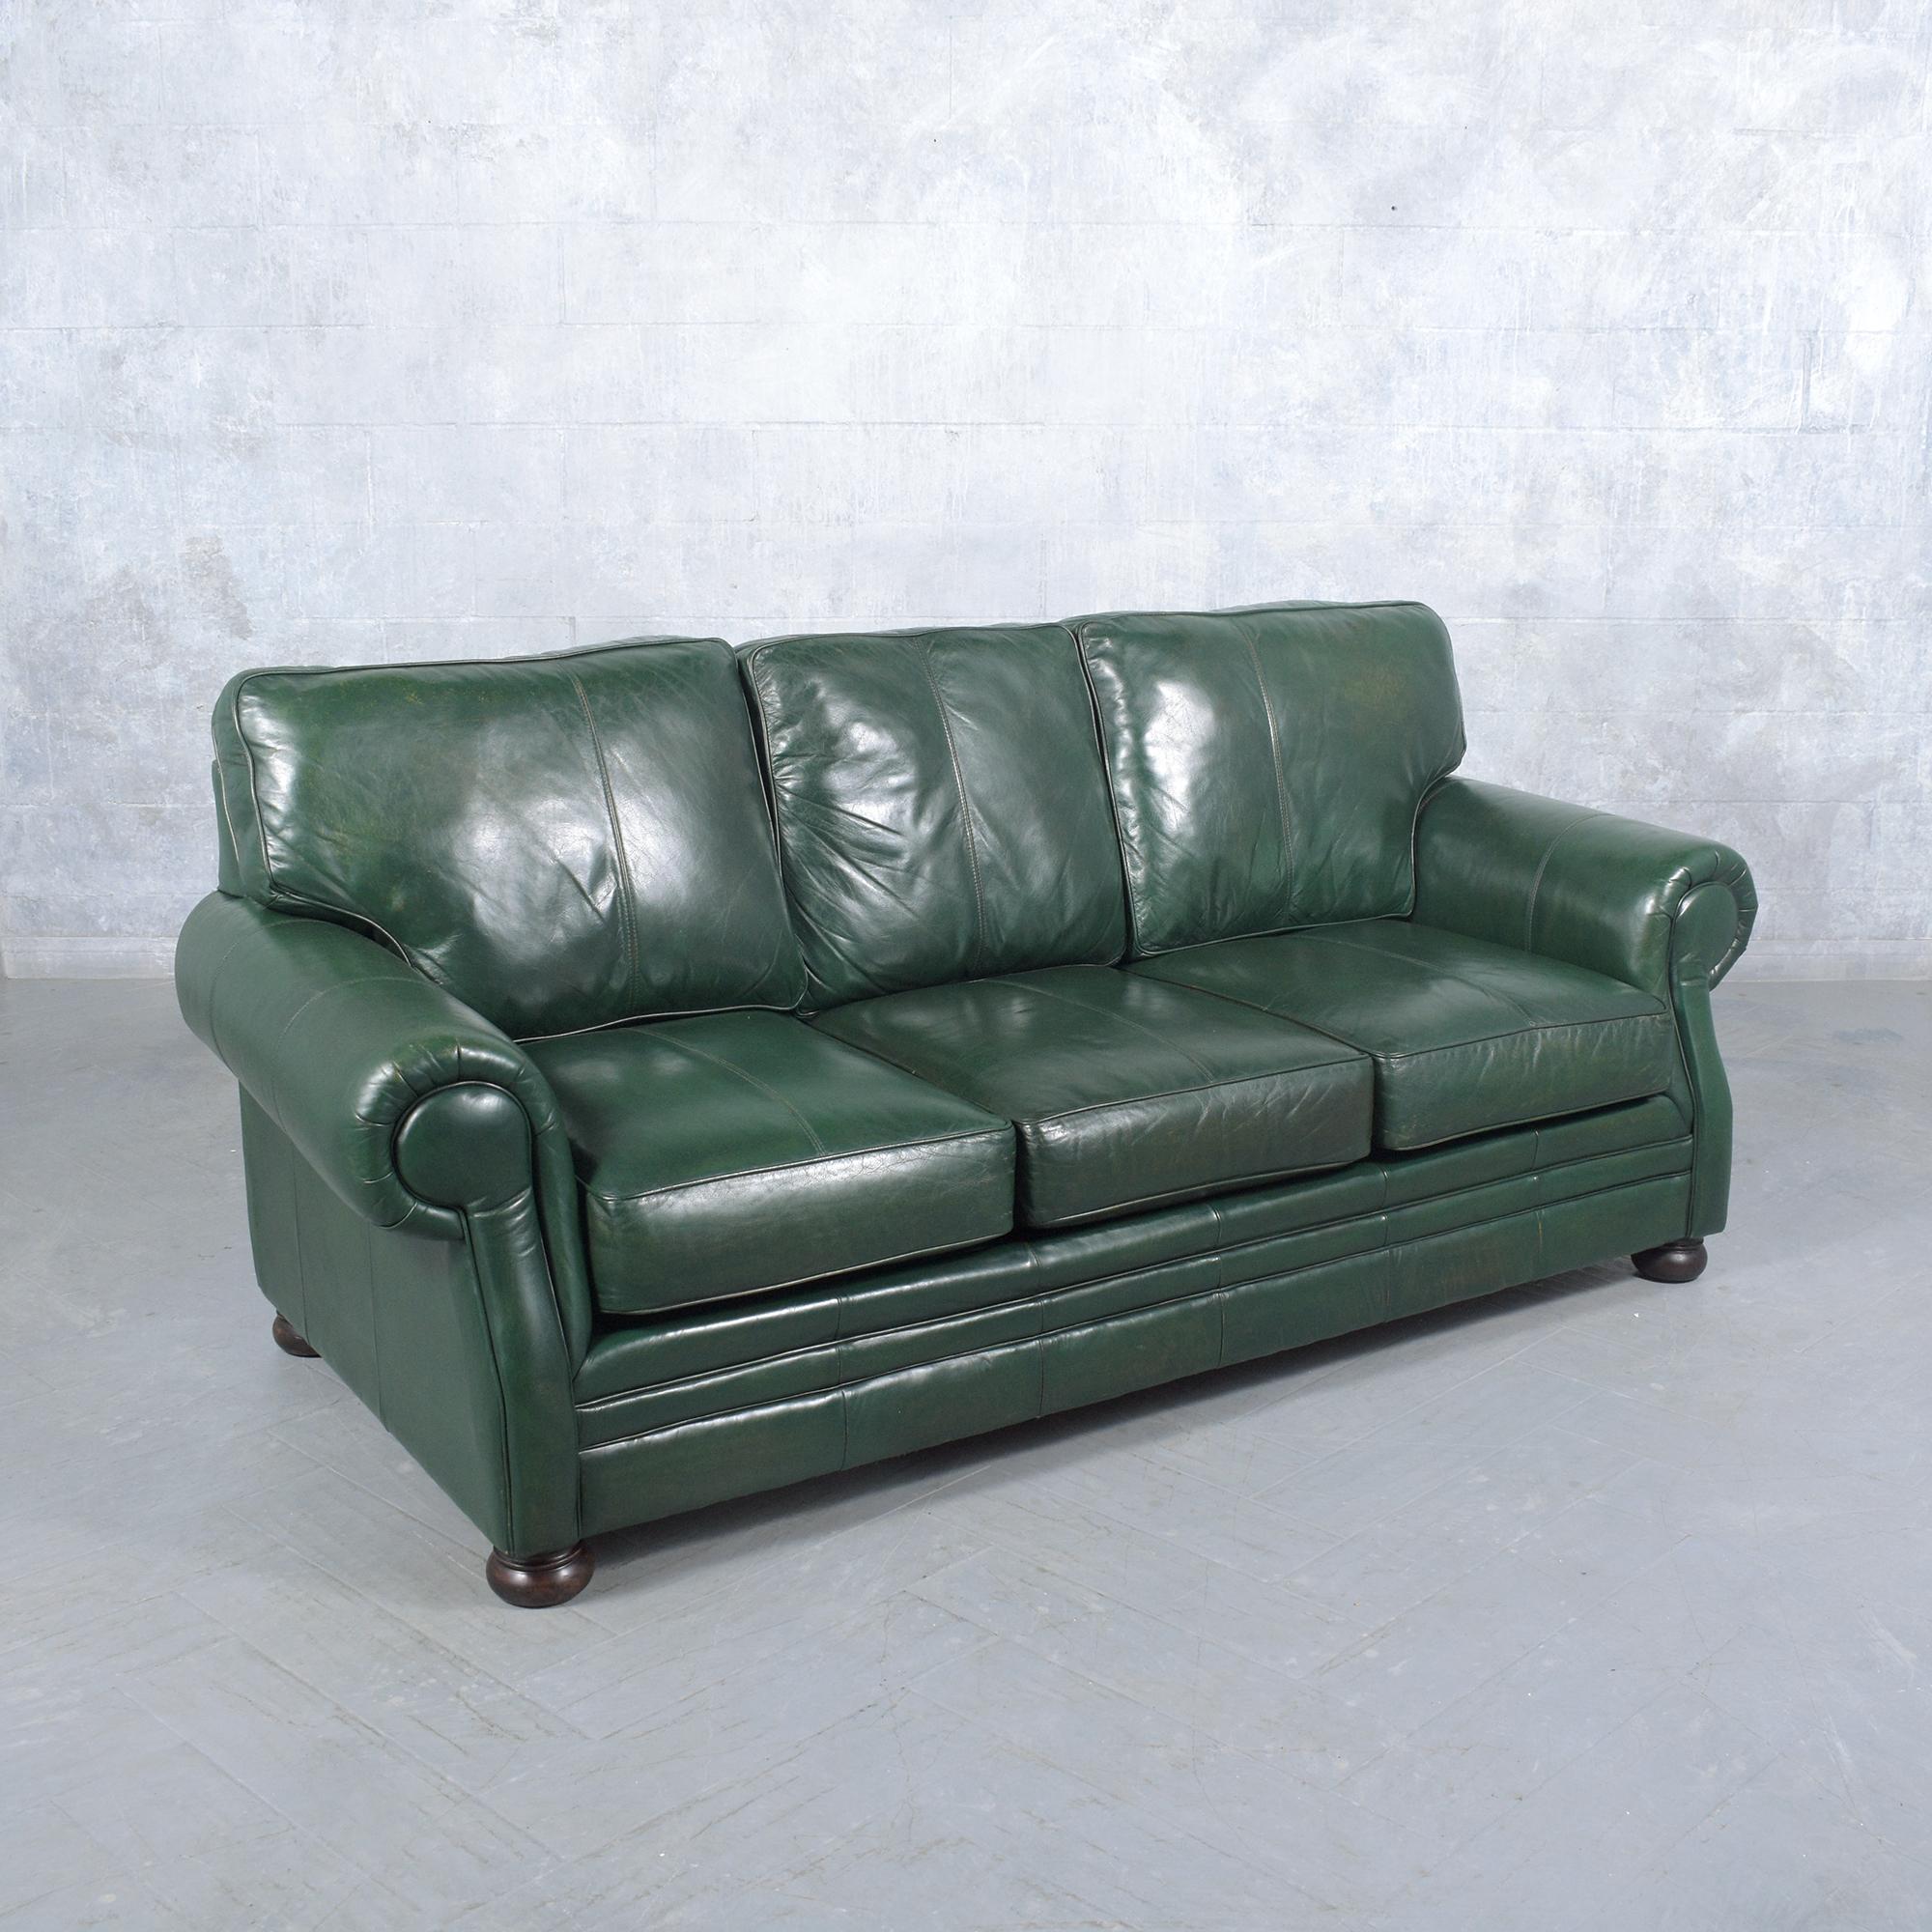 Restored 1980s Vintage Leather Sofa in Dark Green with Carved Bun Legs In Good Condition For Sale In Los Angeles, CA